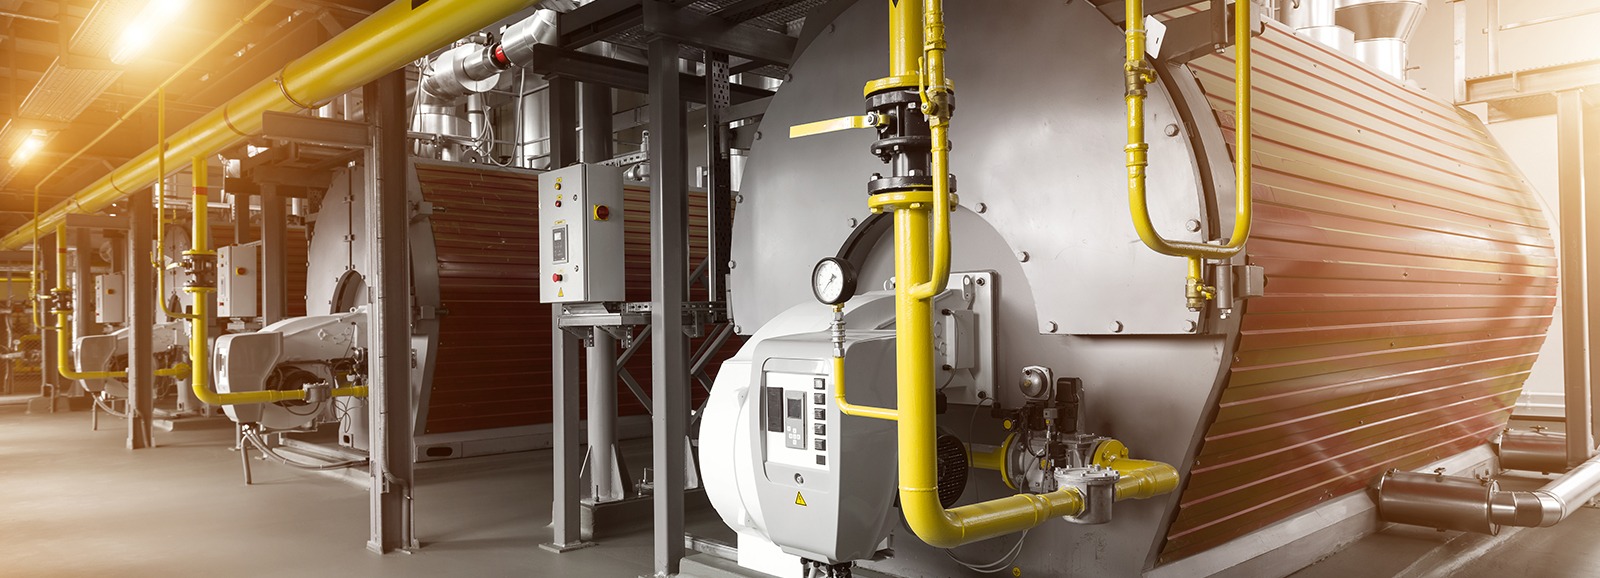 how to optimise industrial boiler combustion